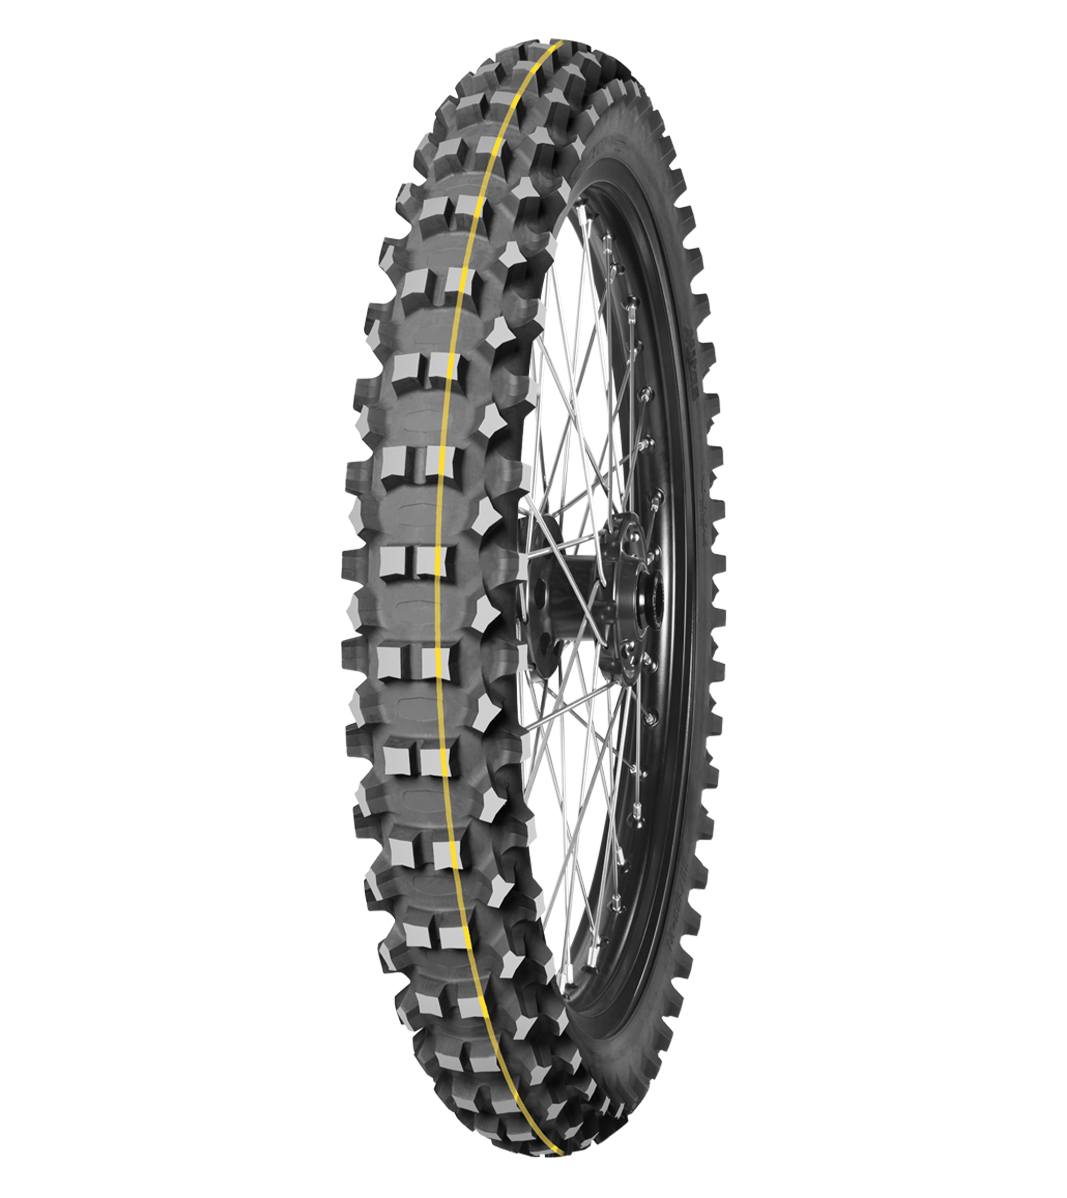 Mitas TERRA FORCE-MX MH 70/100-19 Enduro Competition Off-Road SUPER 42M Yellow Tube Front Tire, 226174, 70/100-19, Enduro Competition, Front, Off-Road, Terra Force, Terra Force-MX MH, Trail, Tires - Imported and distributed in North &amp; South America by Lindeco Genuine Powersports - Premier Powersports Equipment and Accessories for Motorcycle Enthusiasts, Professional Riders and Dealers.